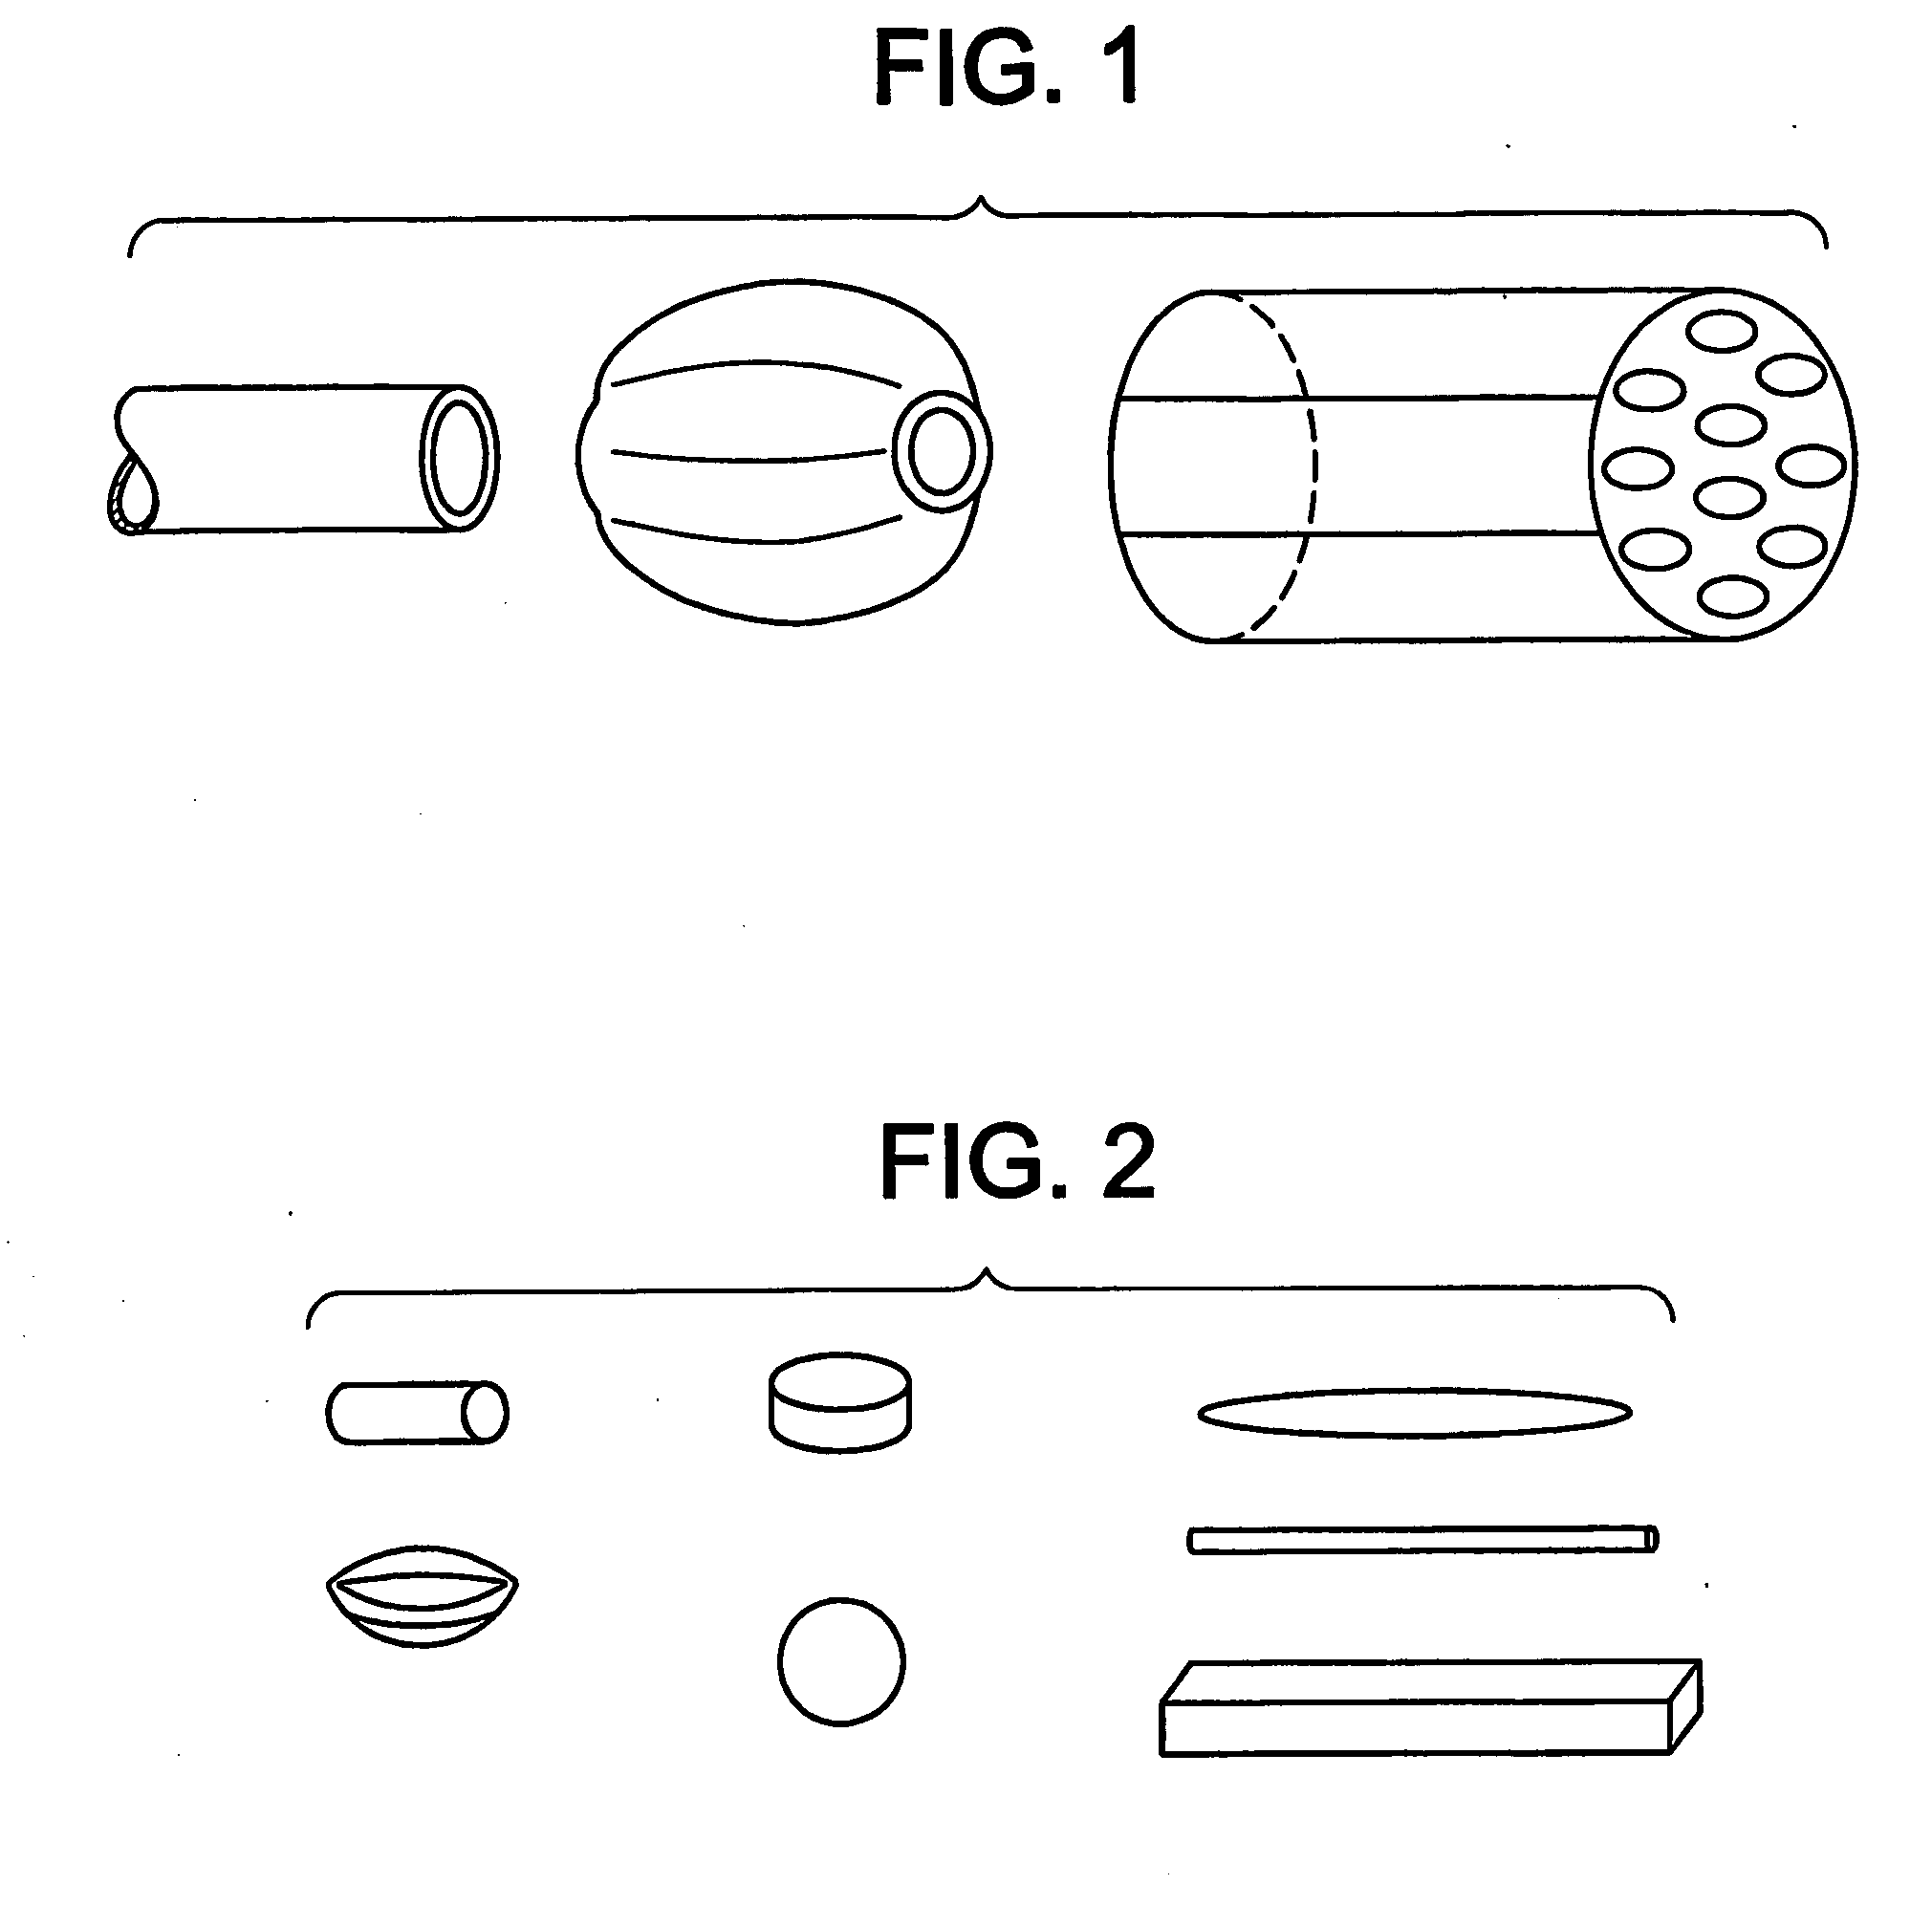 Self-expanding device for the gastrointestinal or urogenital area